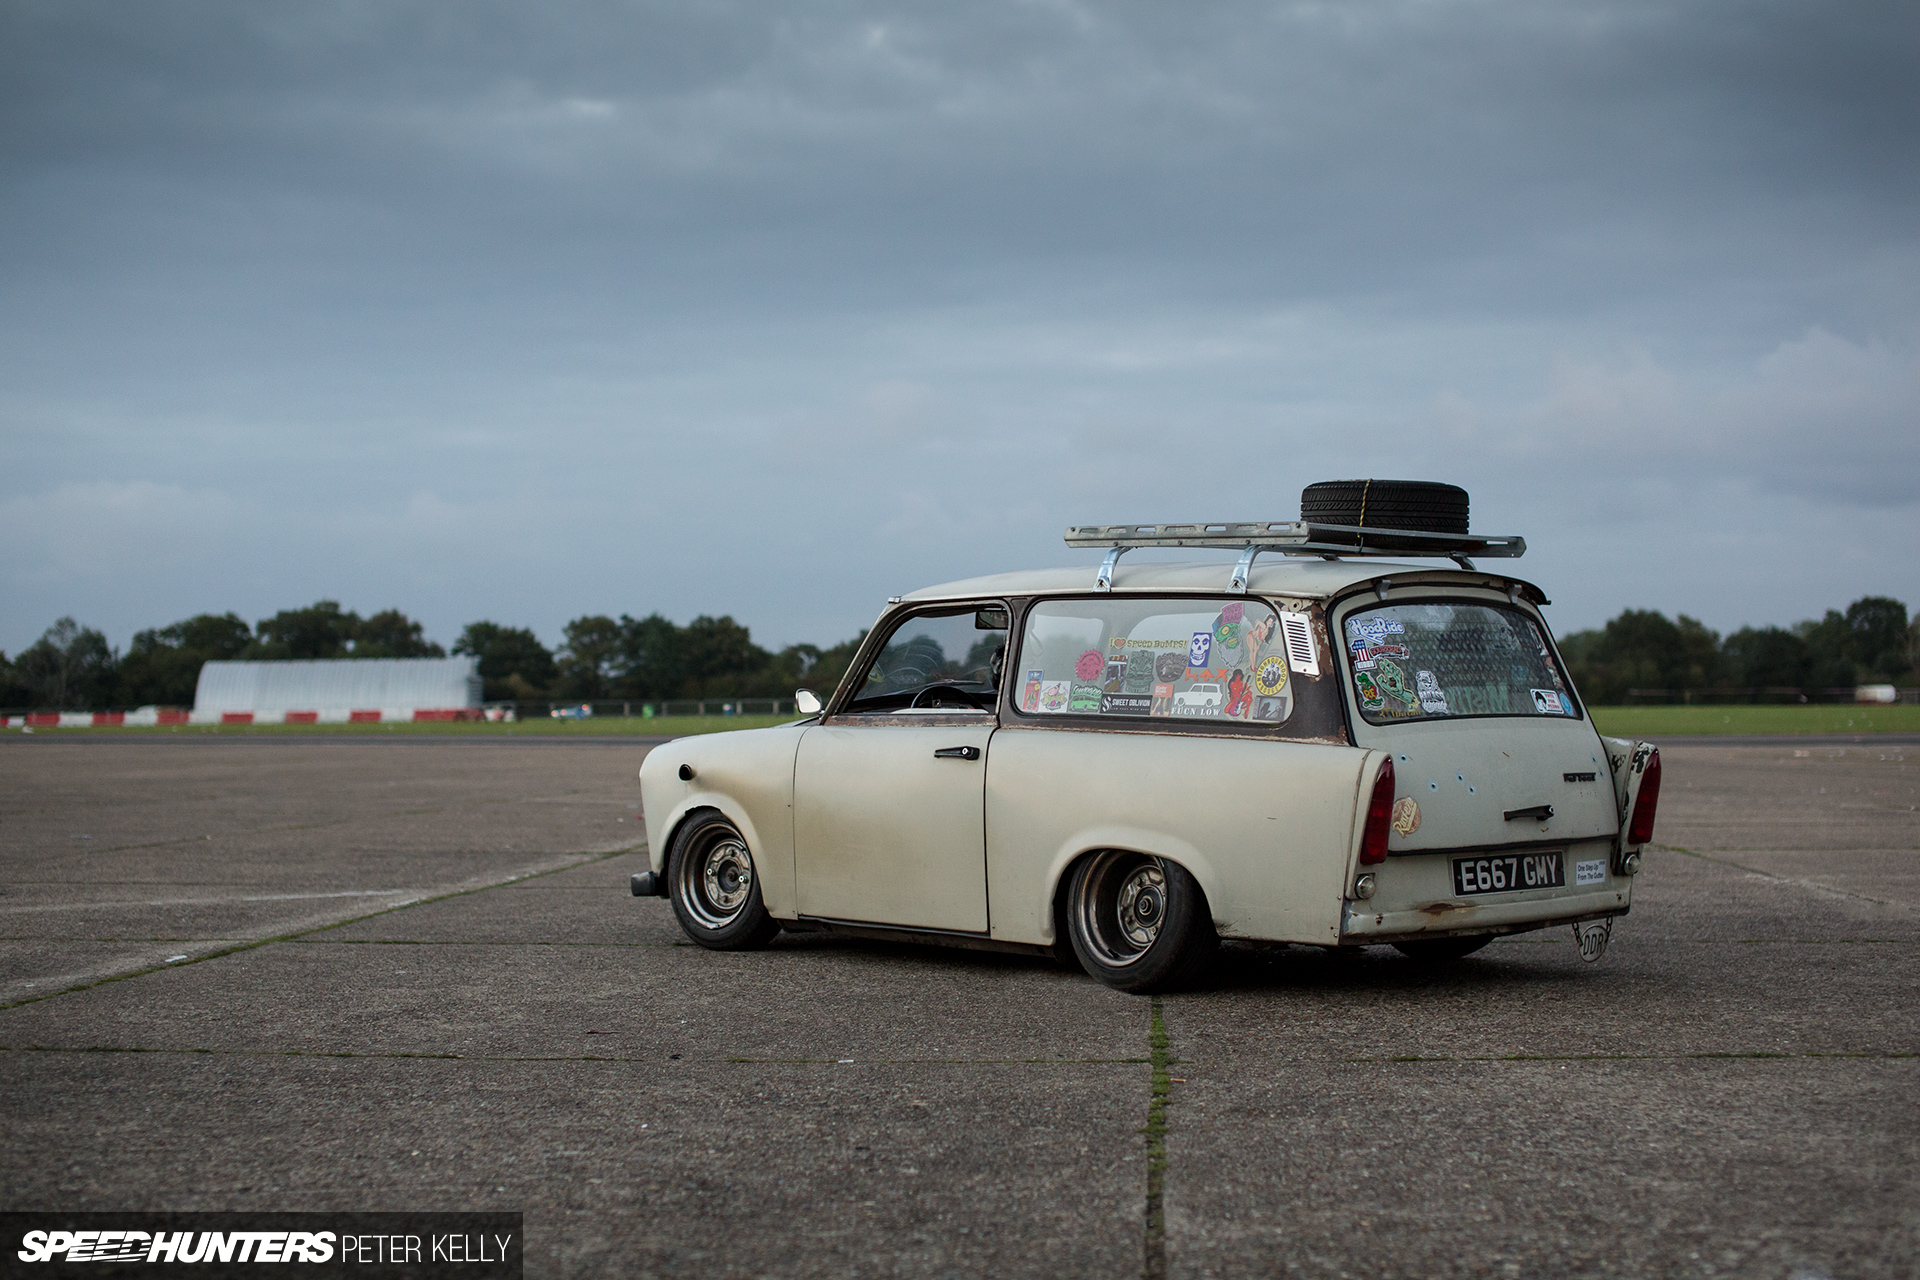 Personal Style Extended: The Ratbant - Speedhunters